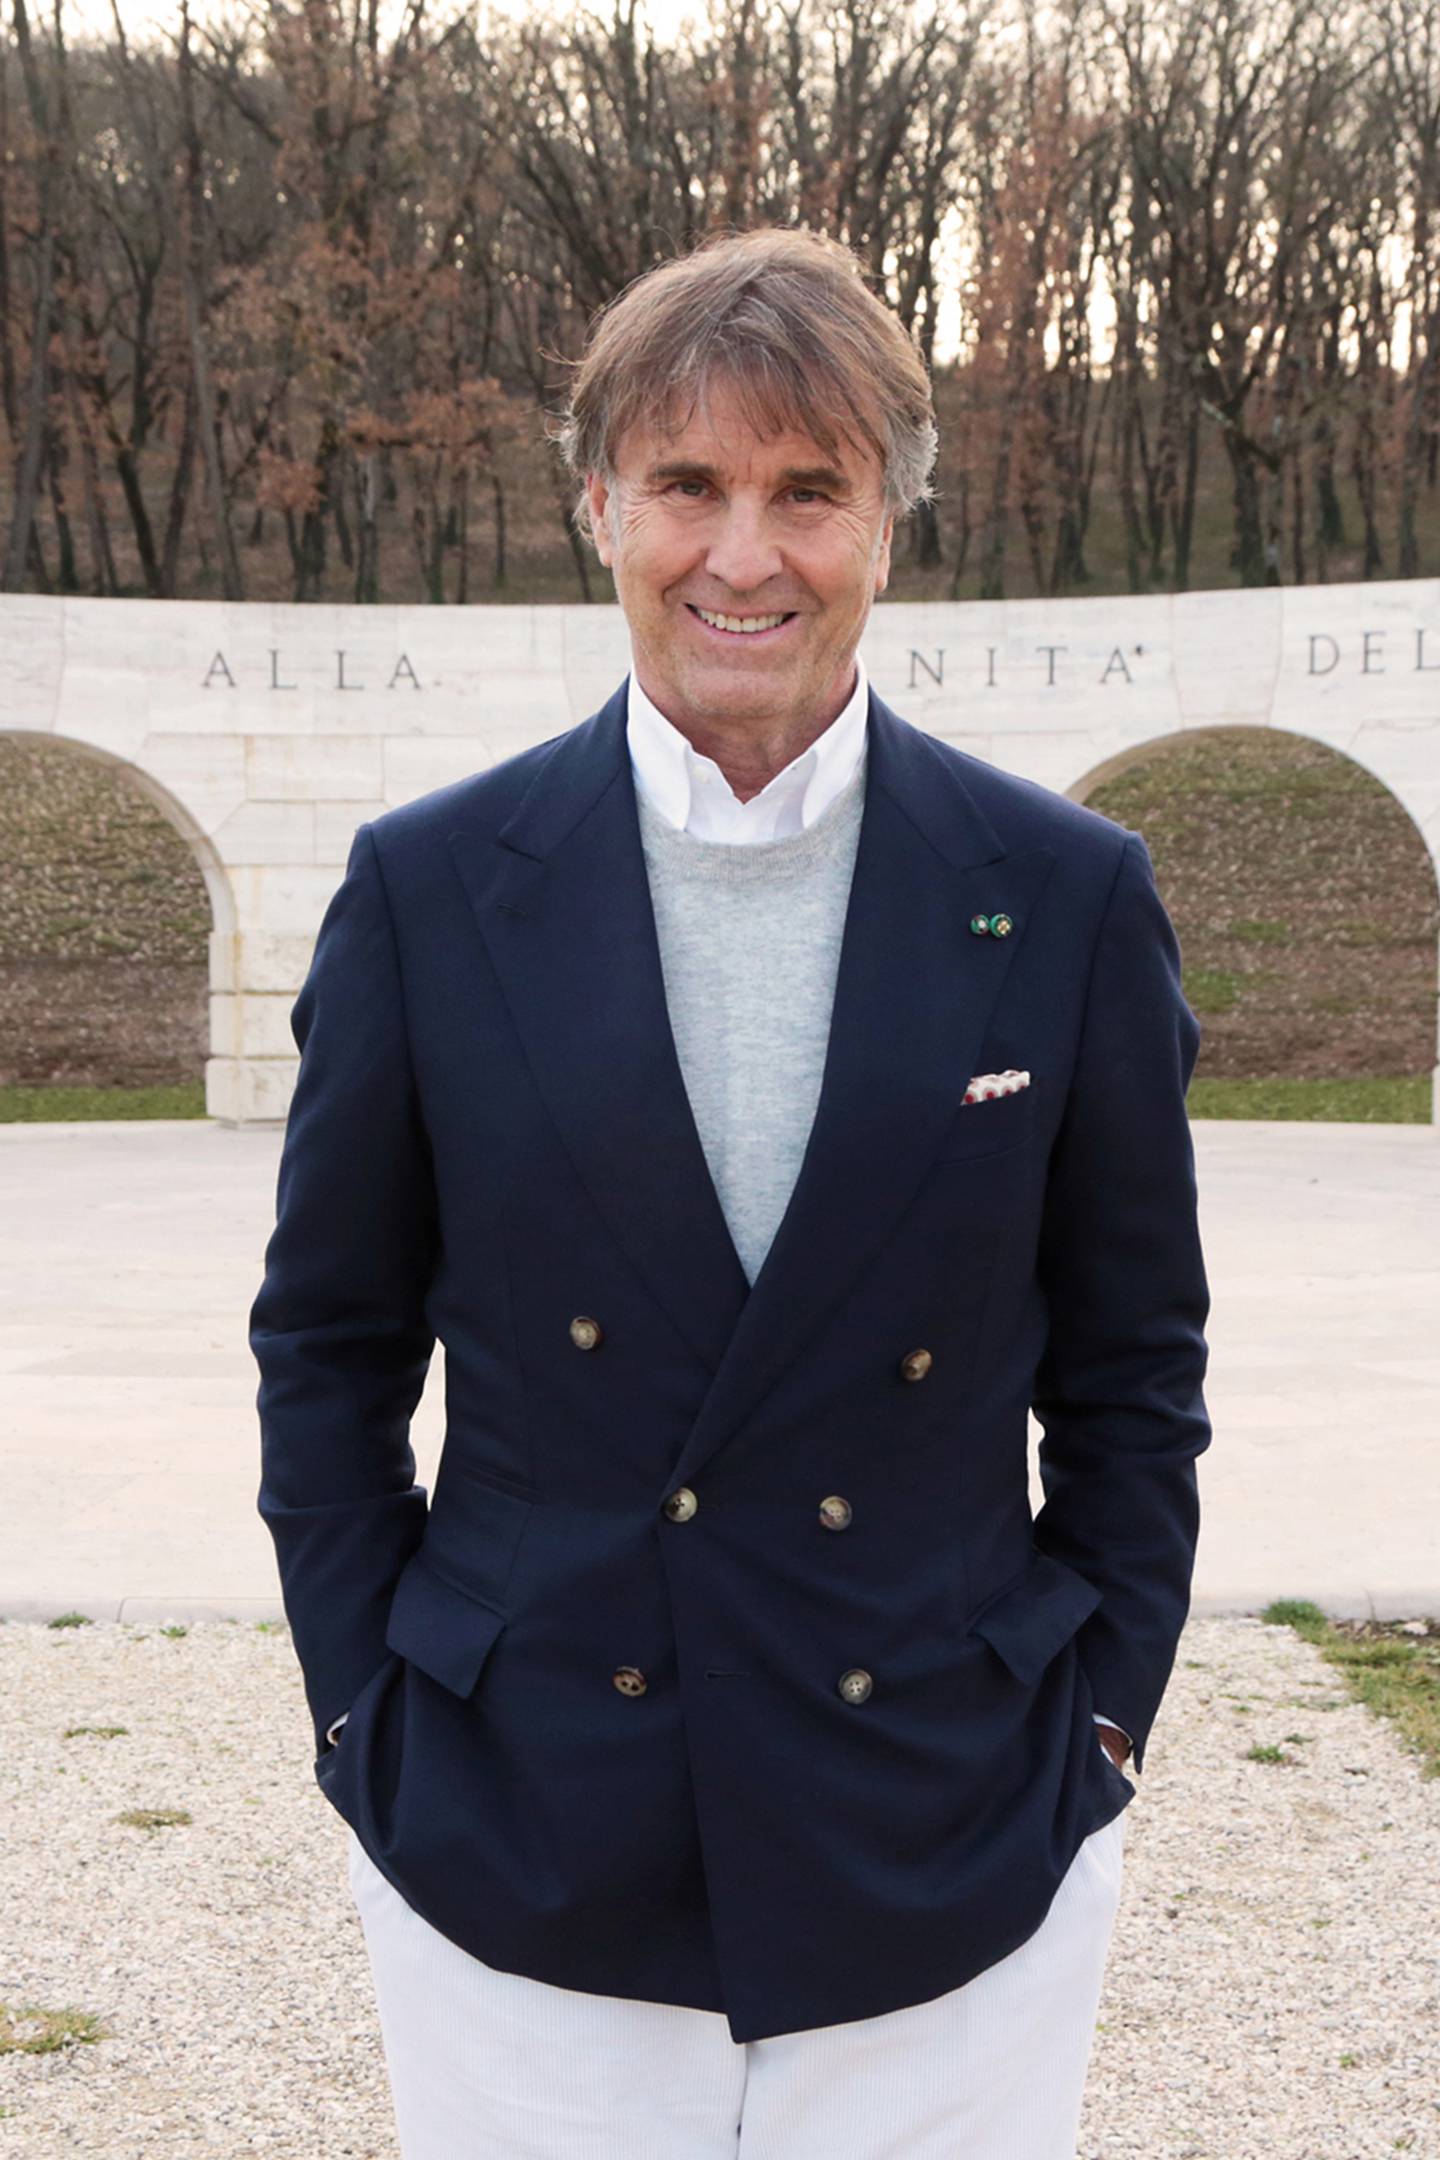 Brunello Cucinelli is executive chairman and creative director of his namesake luxury brand.